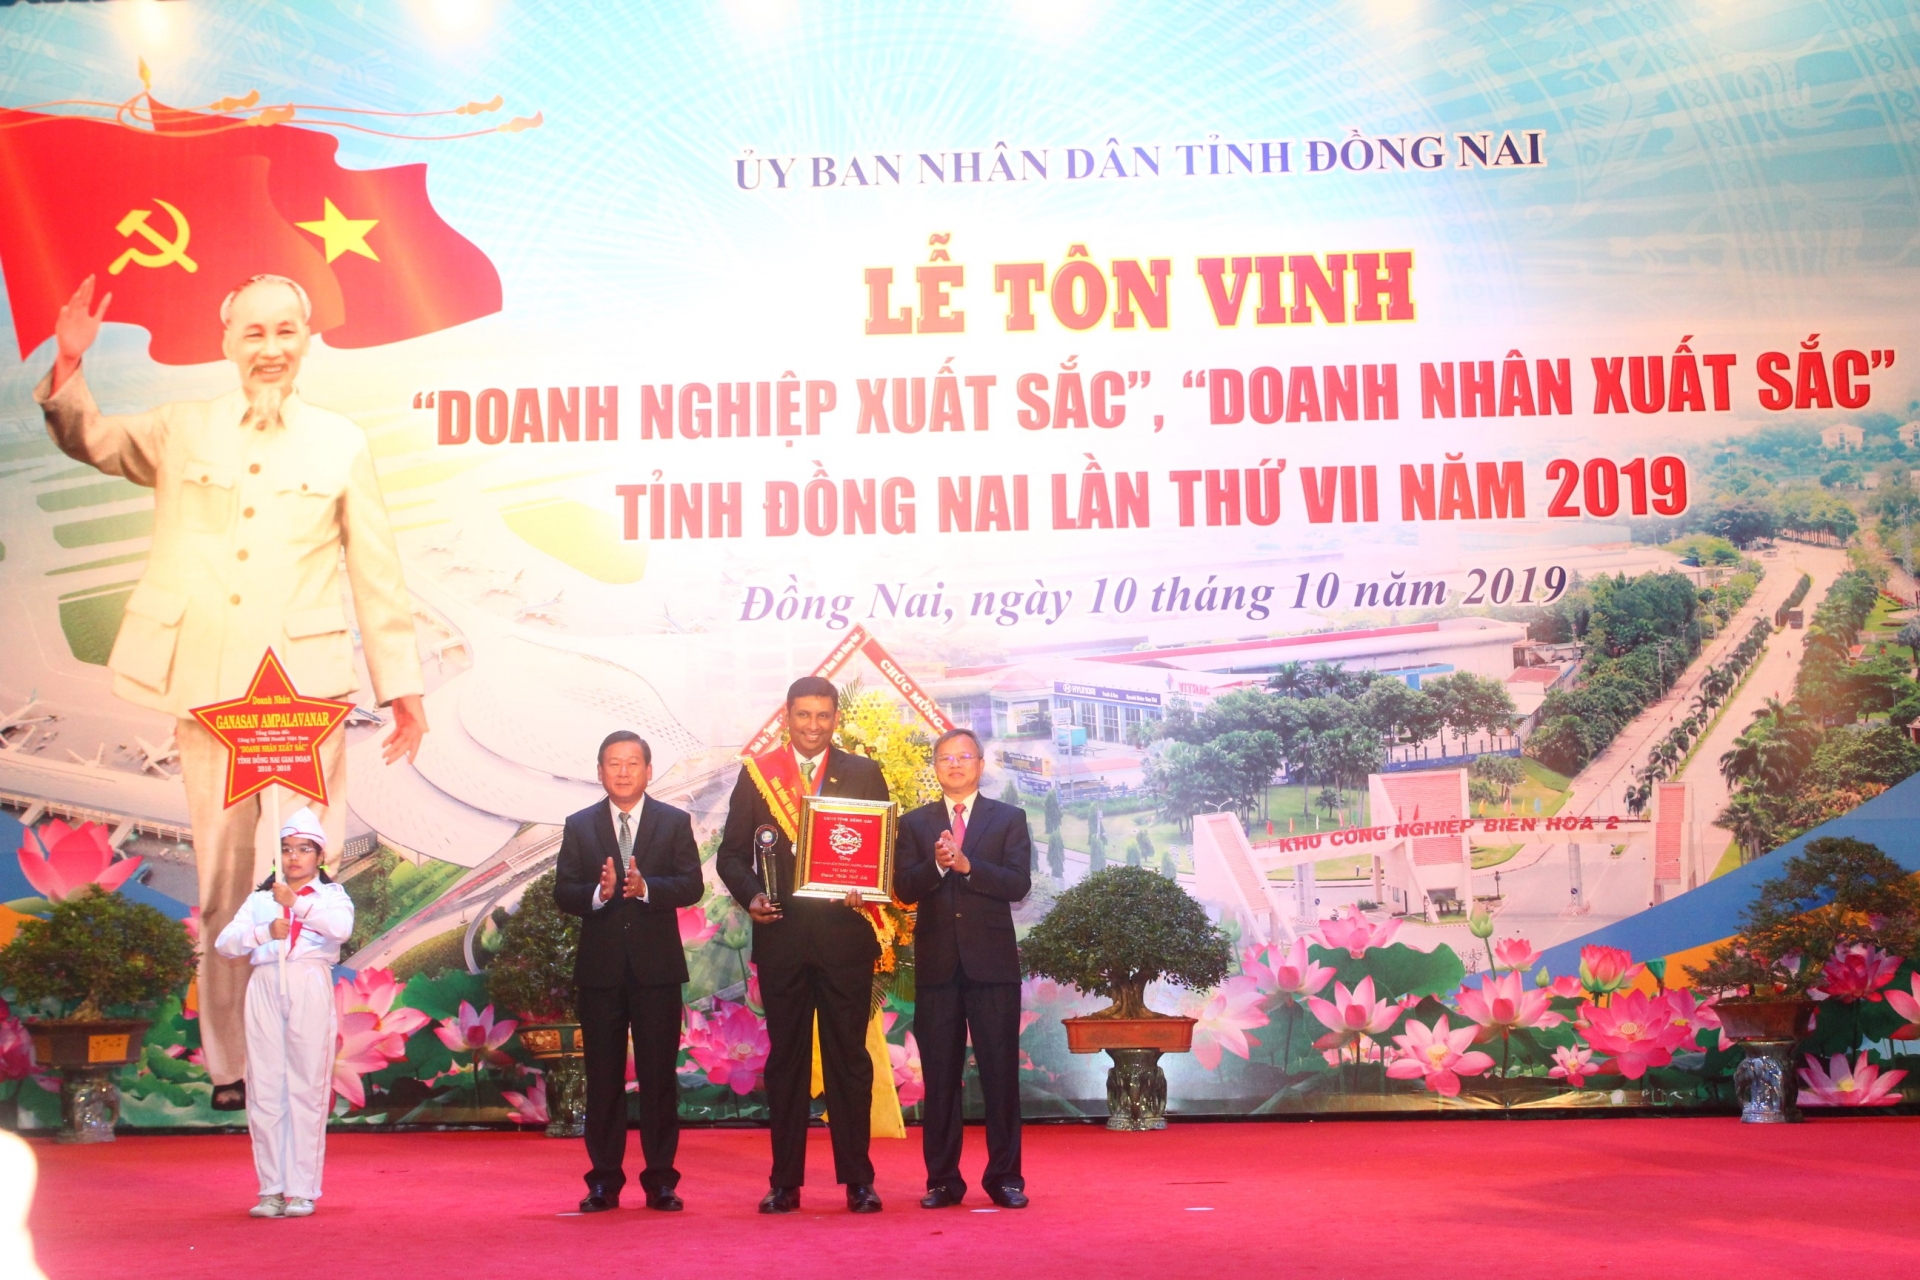 Nestlé honoured as Excellent Business by Dong Nai province